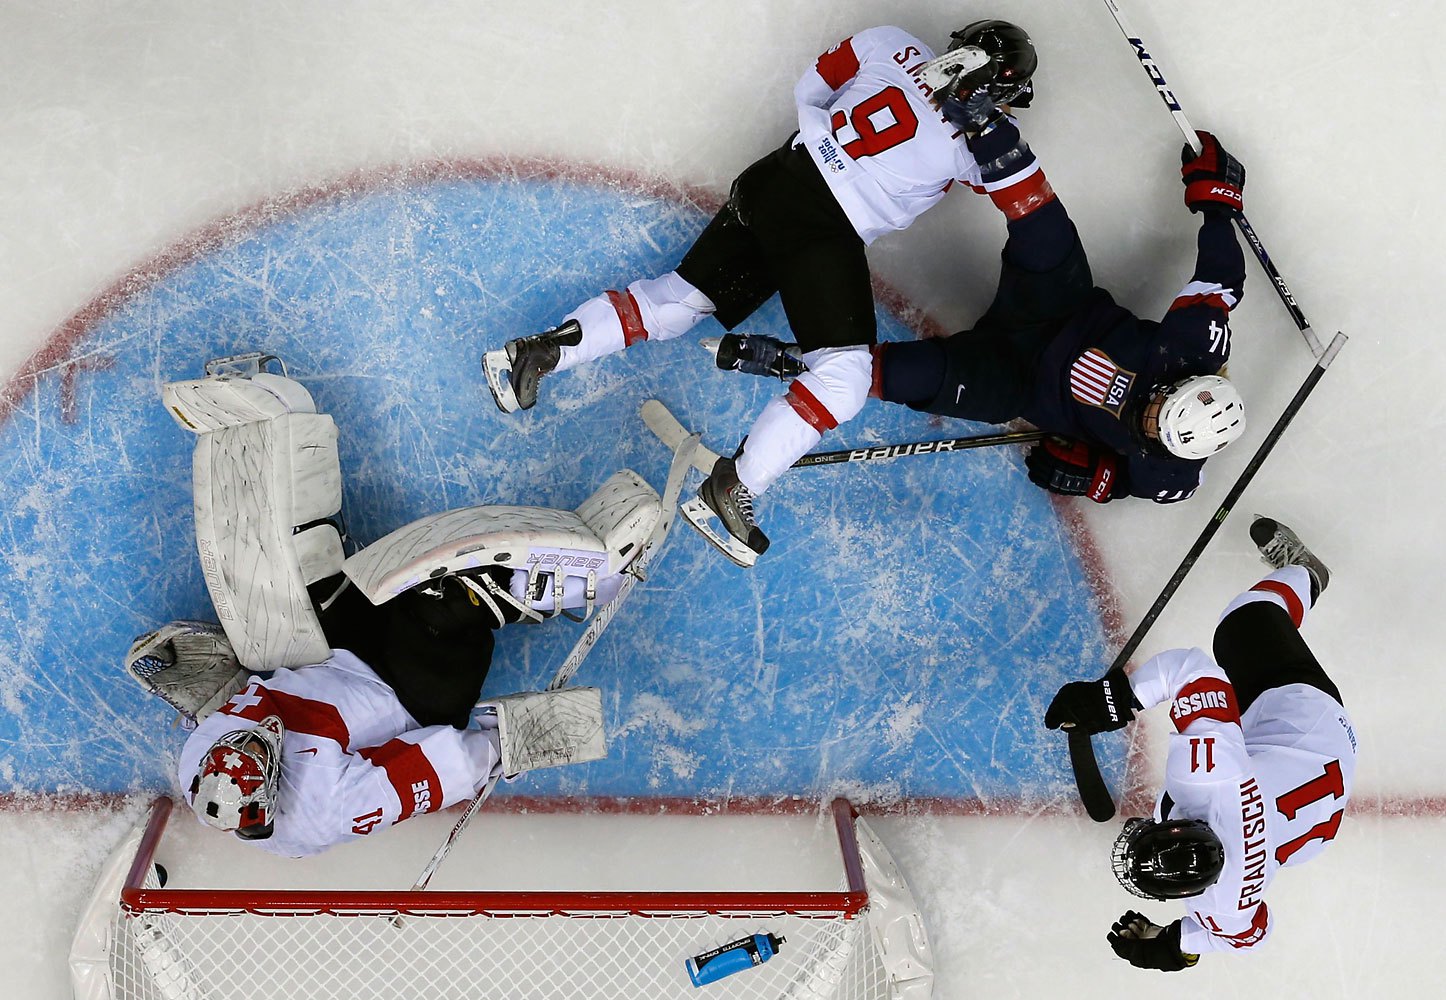 The puck sits in the net behind Switzerland's goalie Florence Schelling after a goal by Team USA's Amanda Kessel (not seen), during the first period of their women's preliminary round hockey game at the Sochi 2014 Winter Olympic Games Feb. 10, 2014.